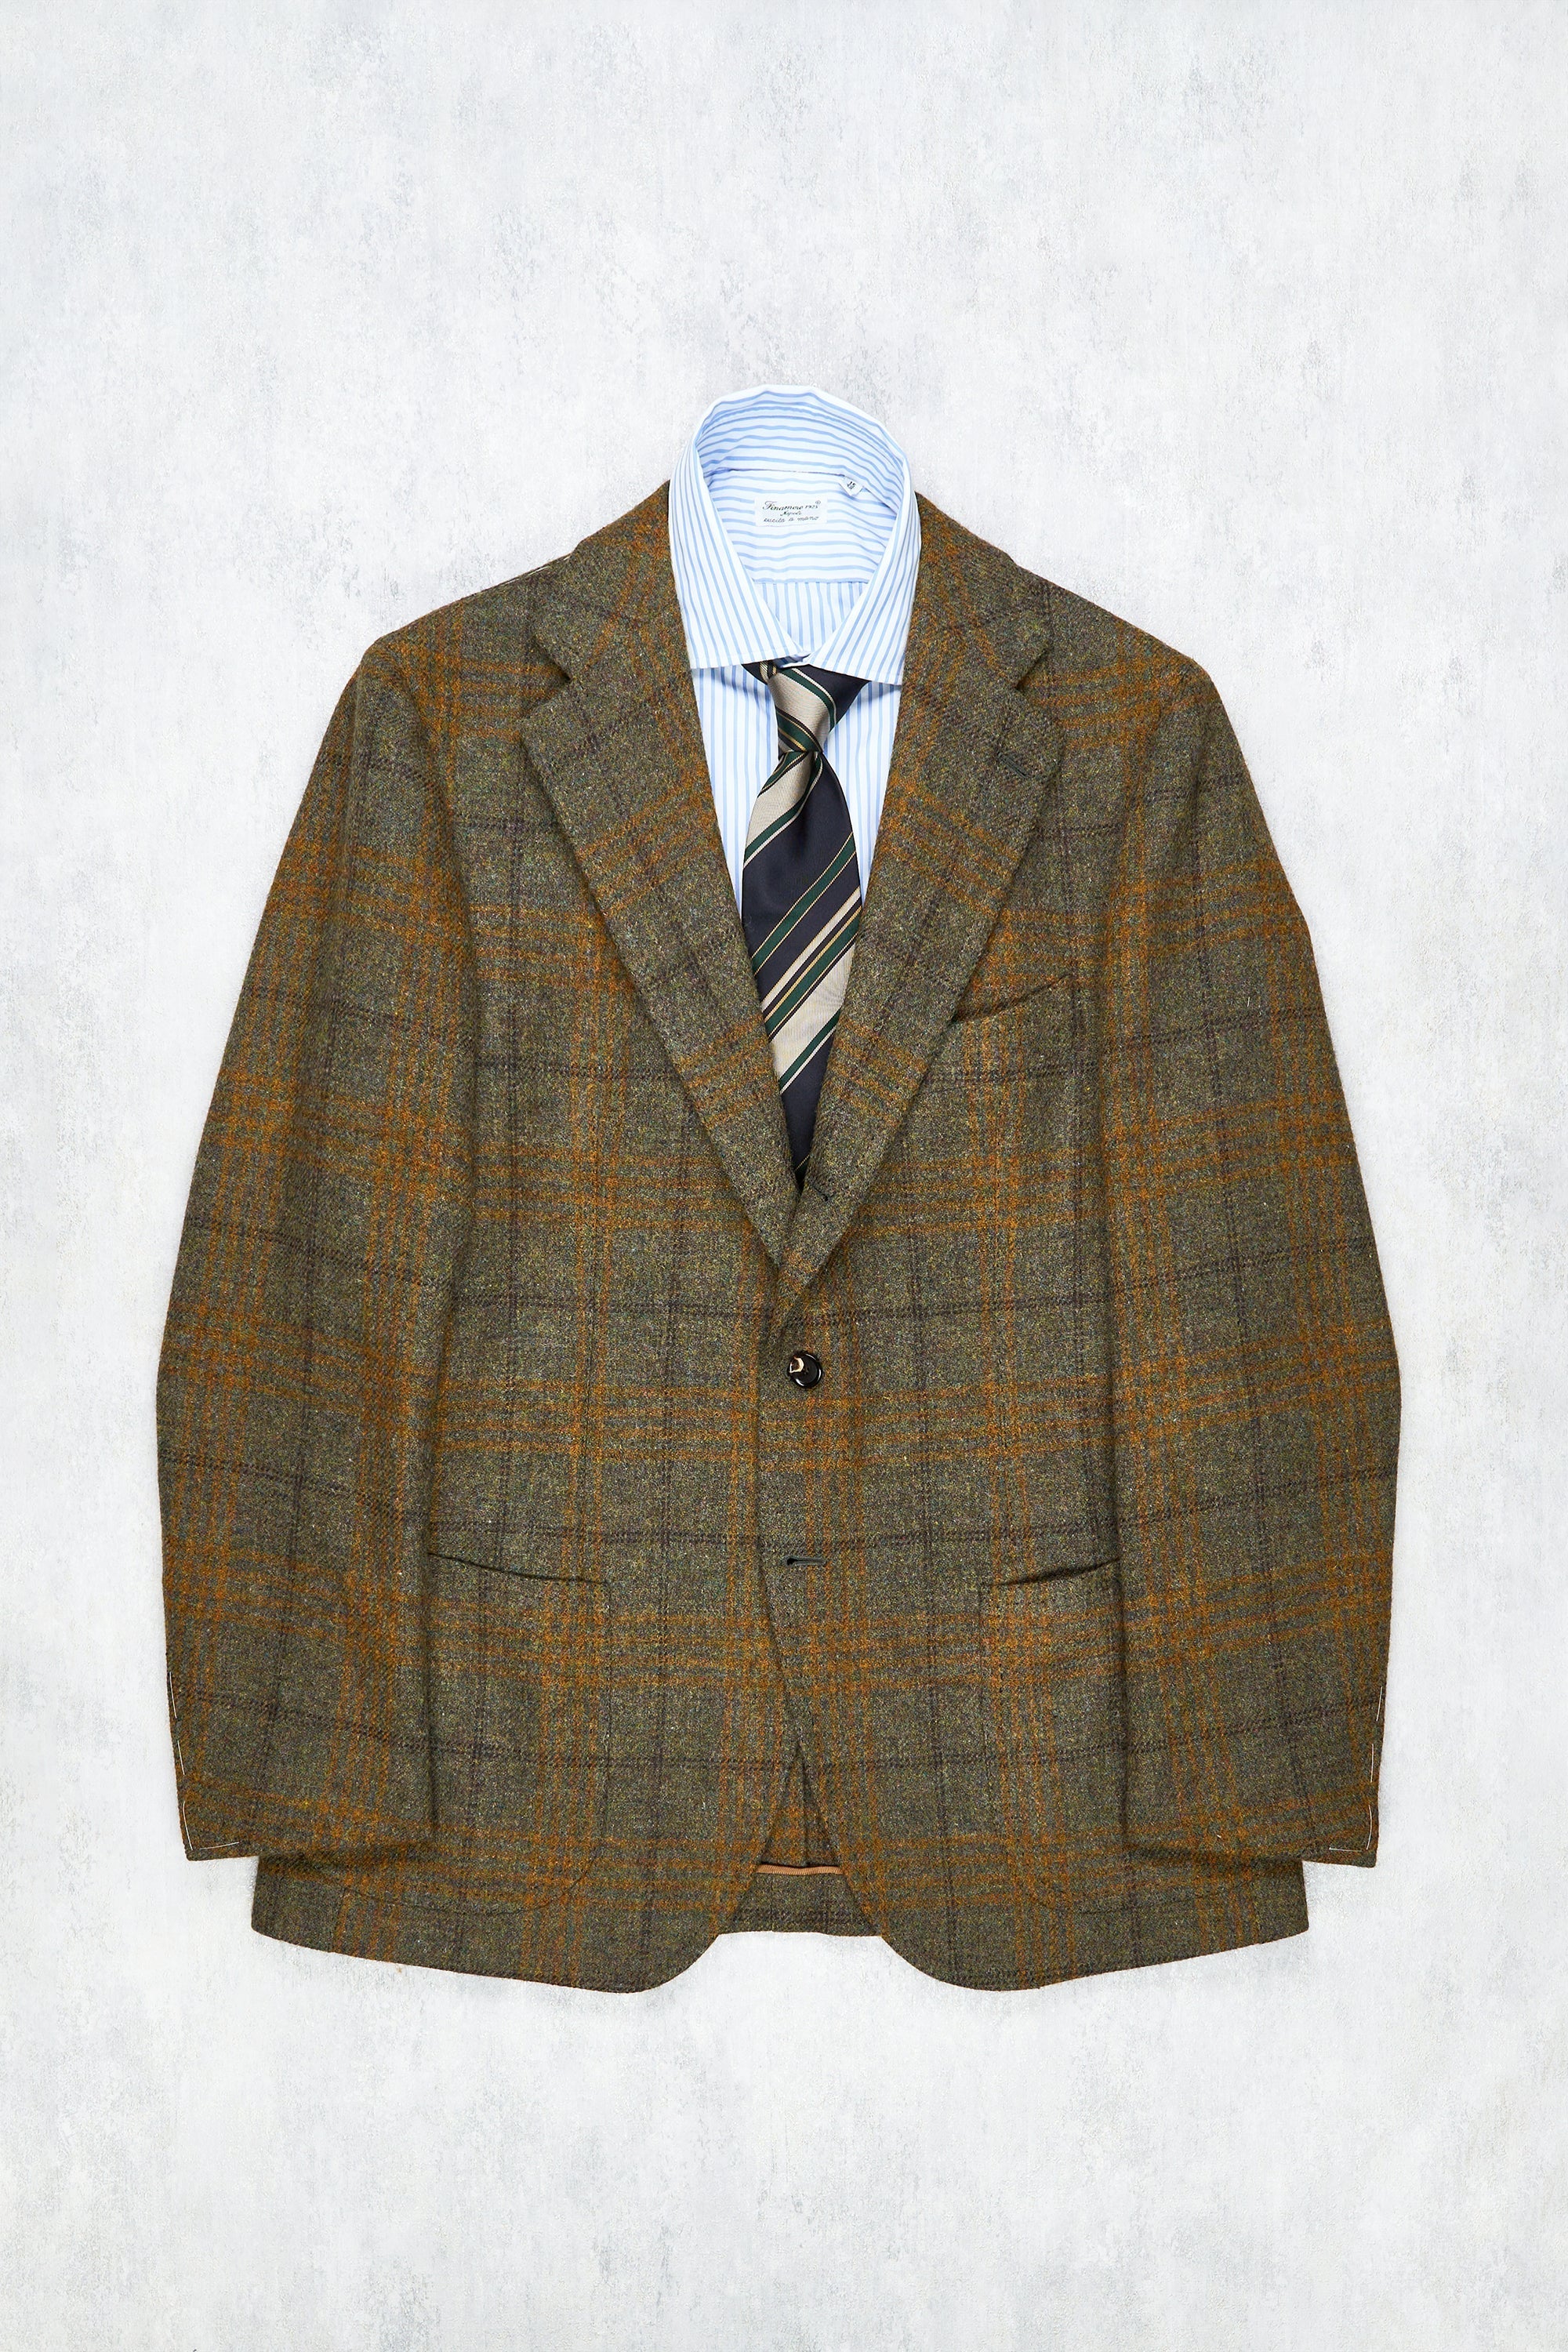 Cesare Attolini Forest Green with Orange/Brown Tweed Check Sport Coat